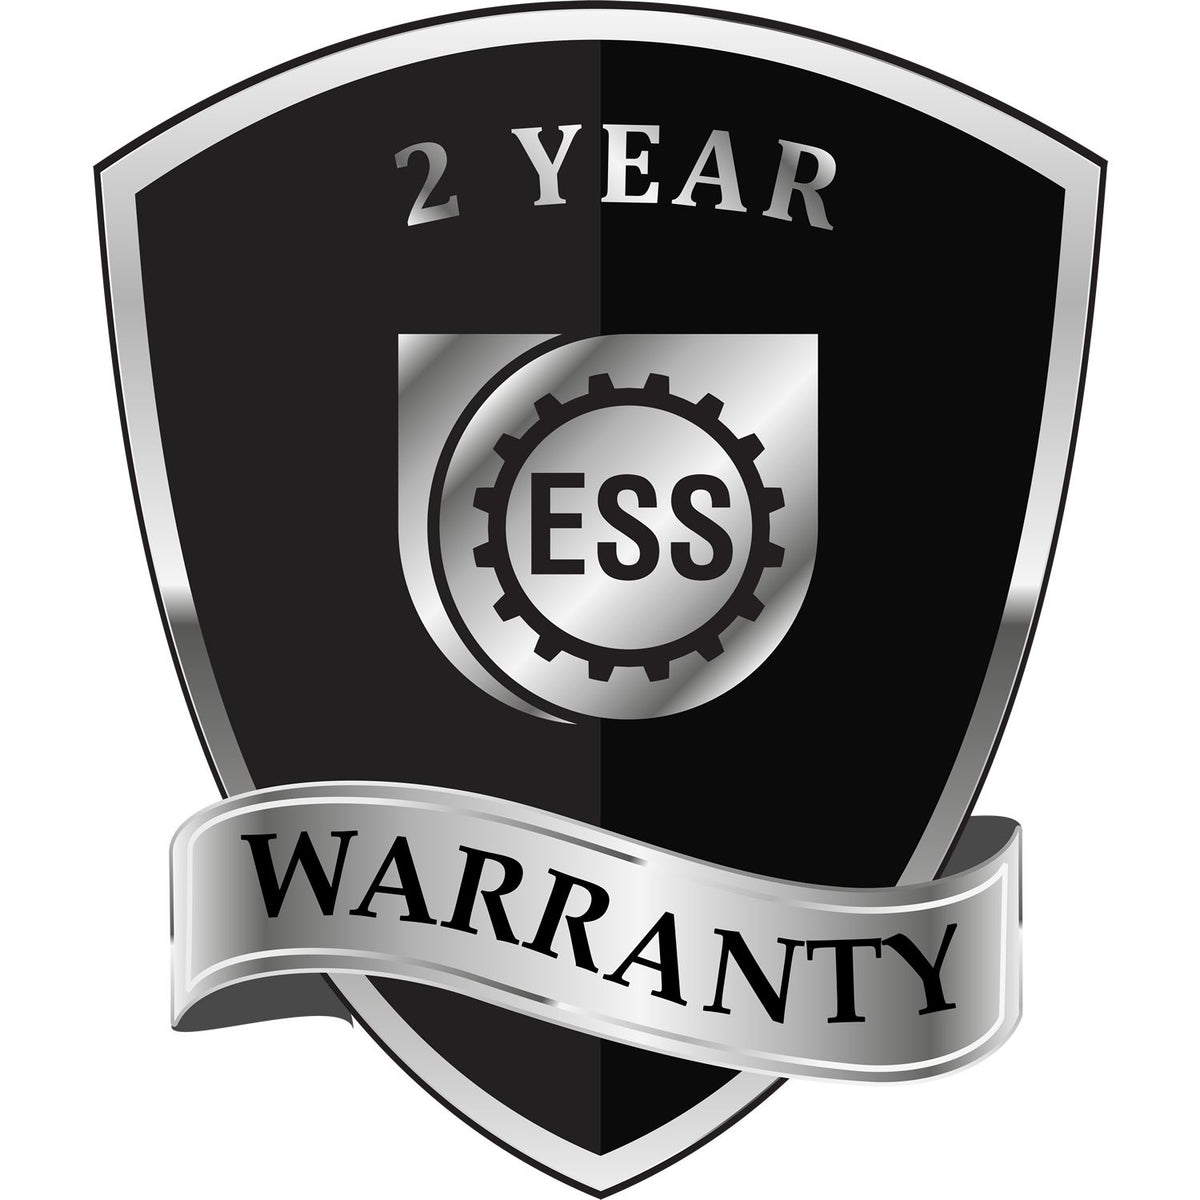 A black and silver badge or emblem showing warranty information for the Long Reach Arkansas Geology Seal